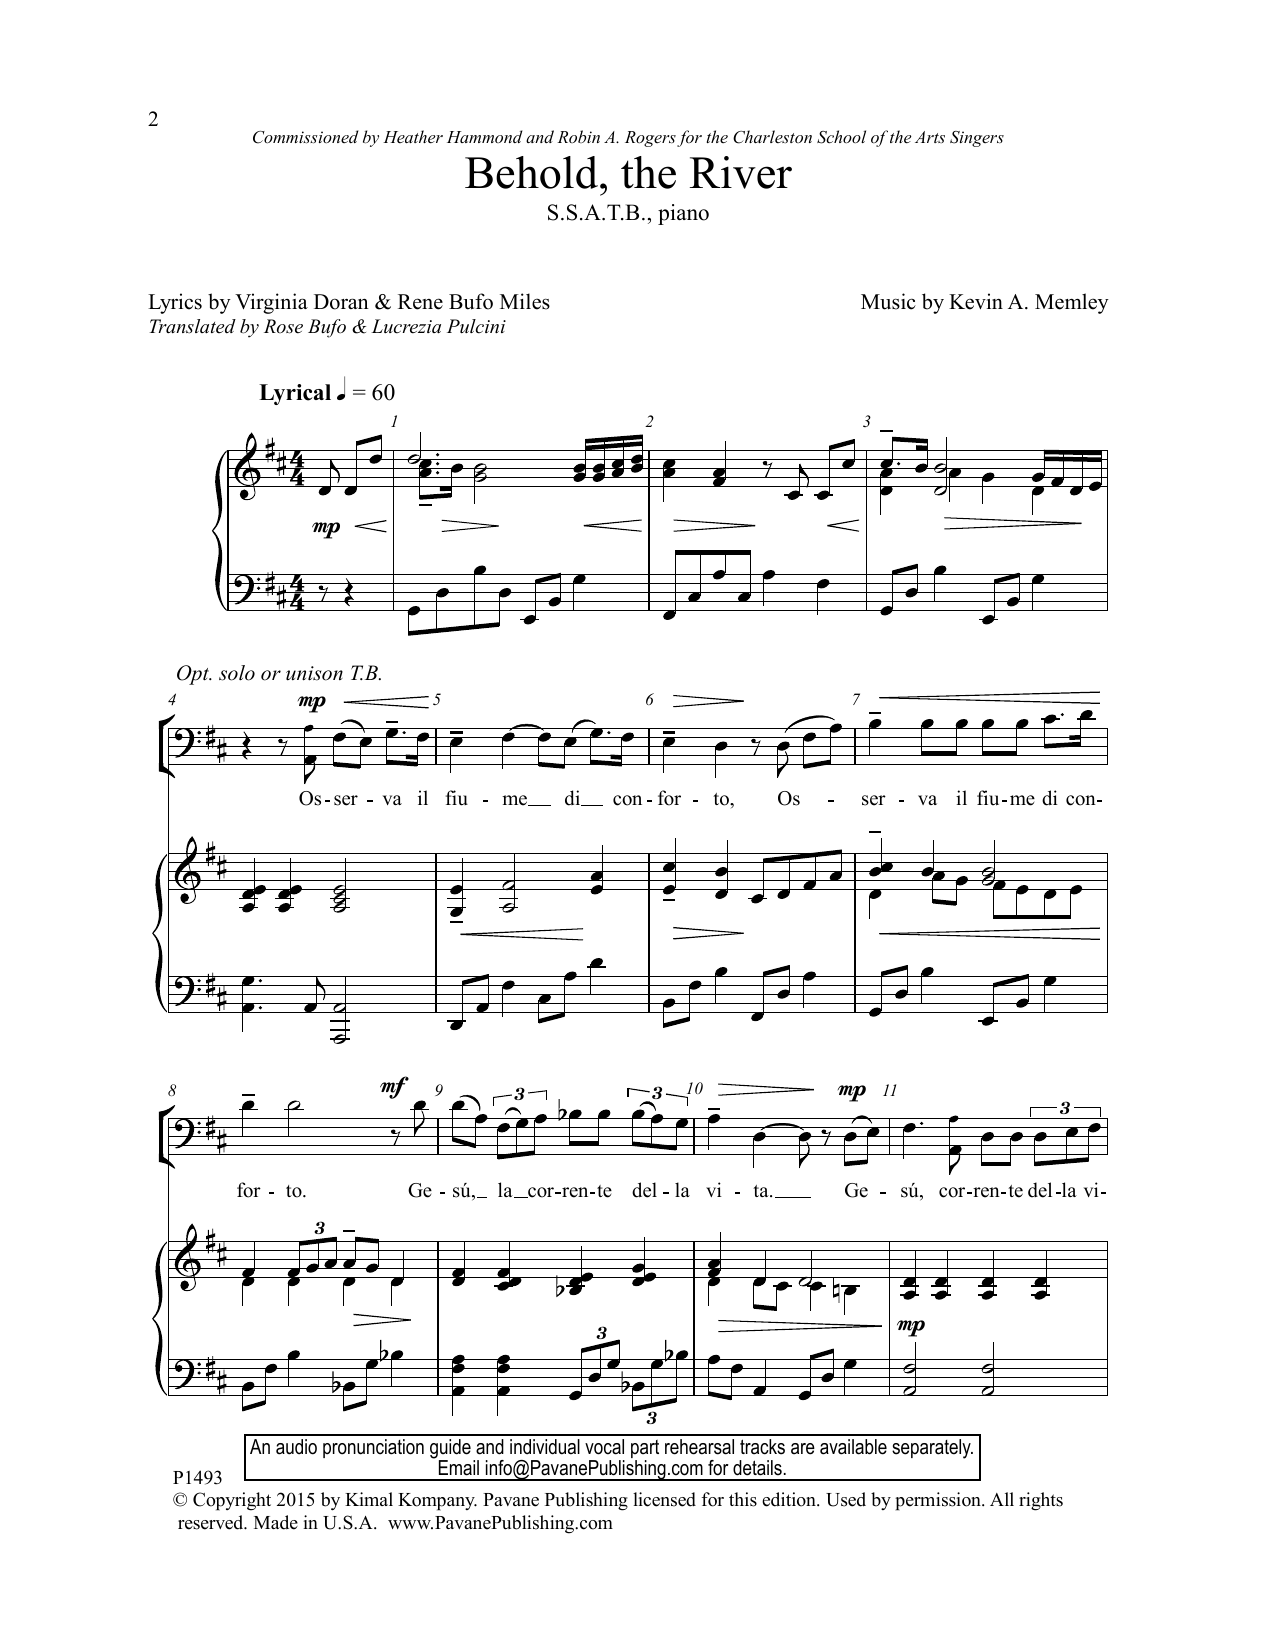 Download Kevin A. Memley Behold the River Sheet Music